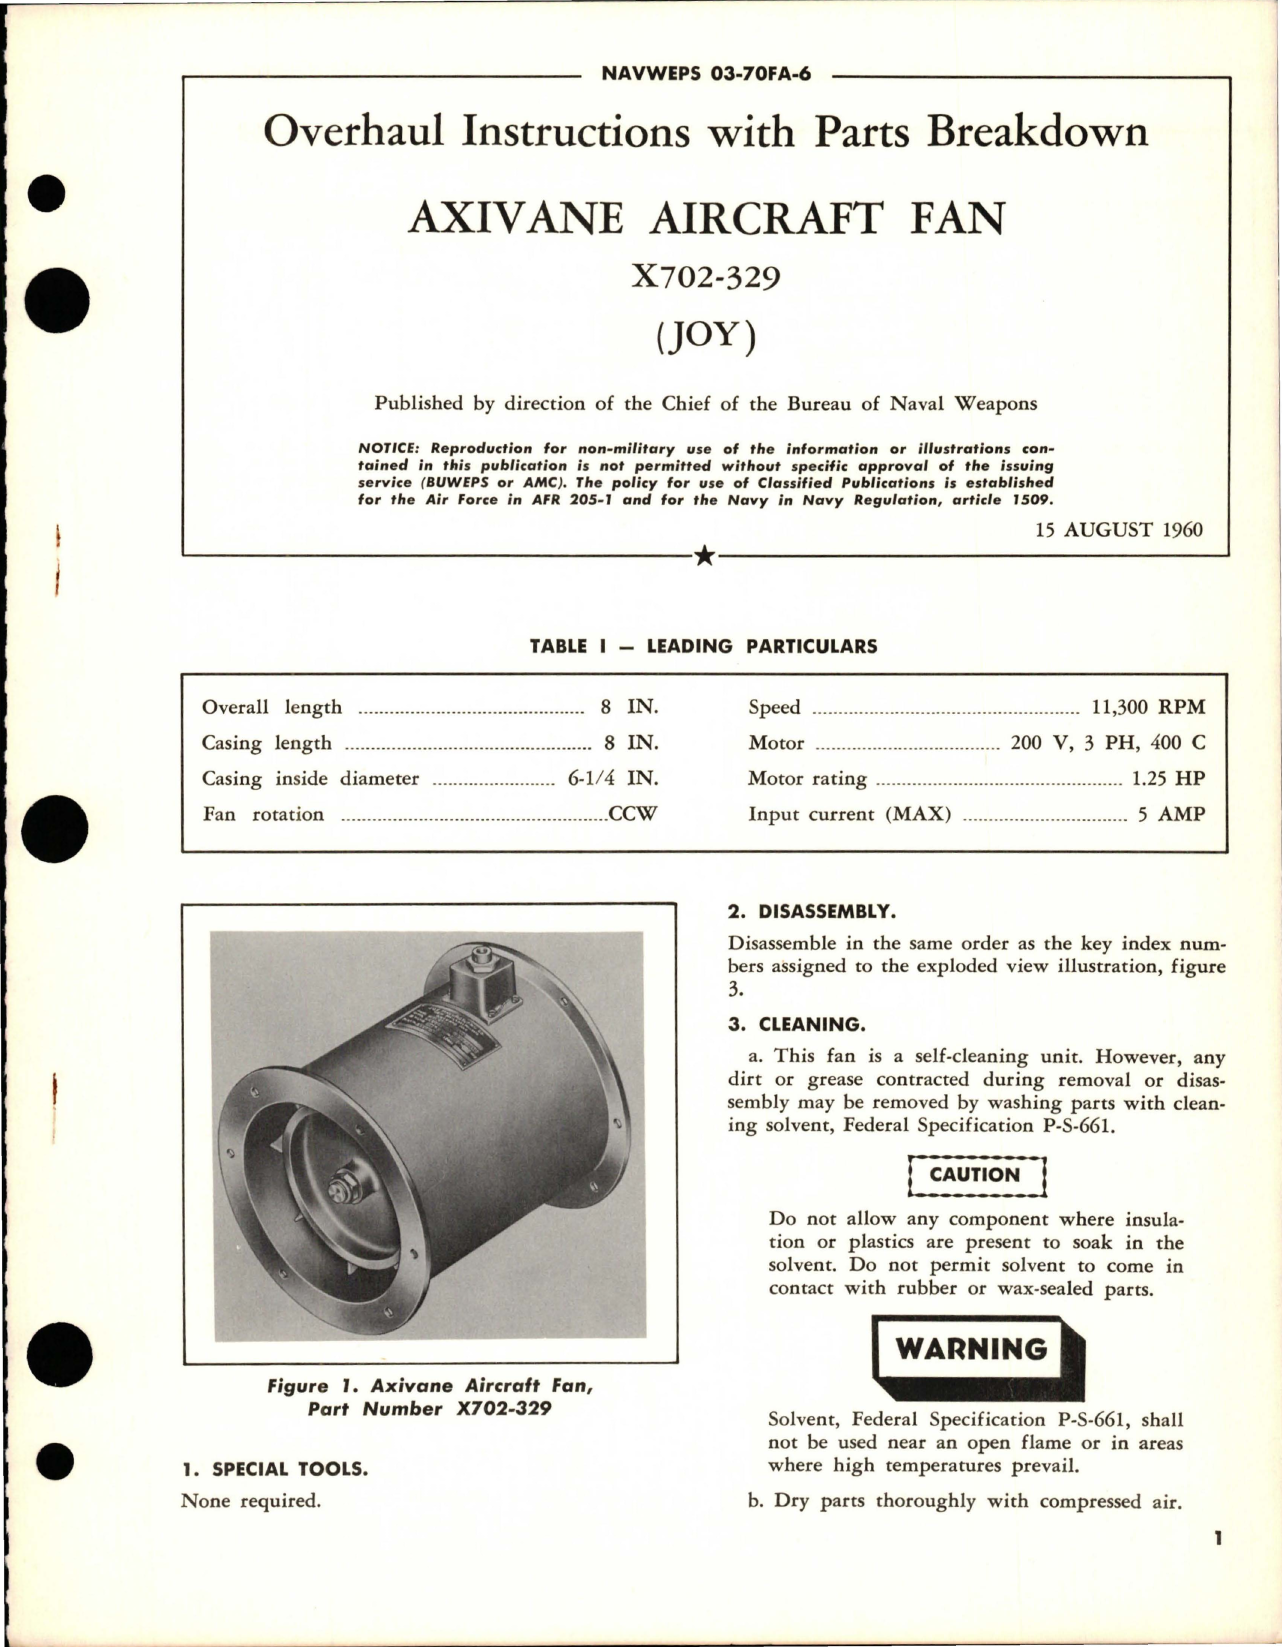 Sample page 1 from AirCorps Library document: Overhaul Instructions with Parts Breakdown for Axivane Aircraft Fan - X702-329 